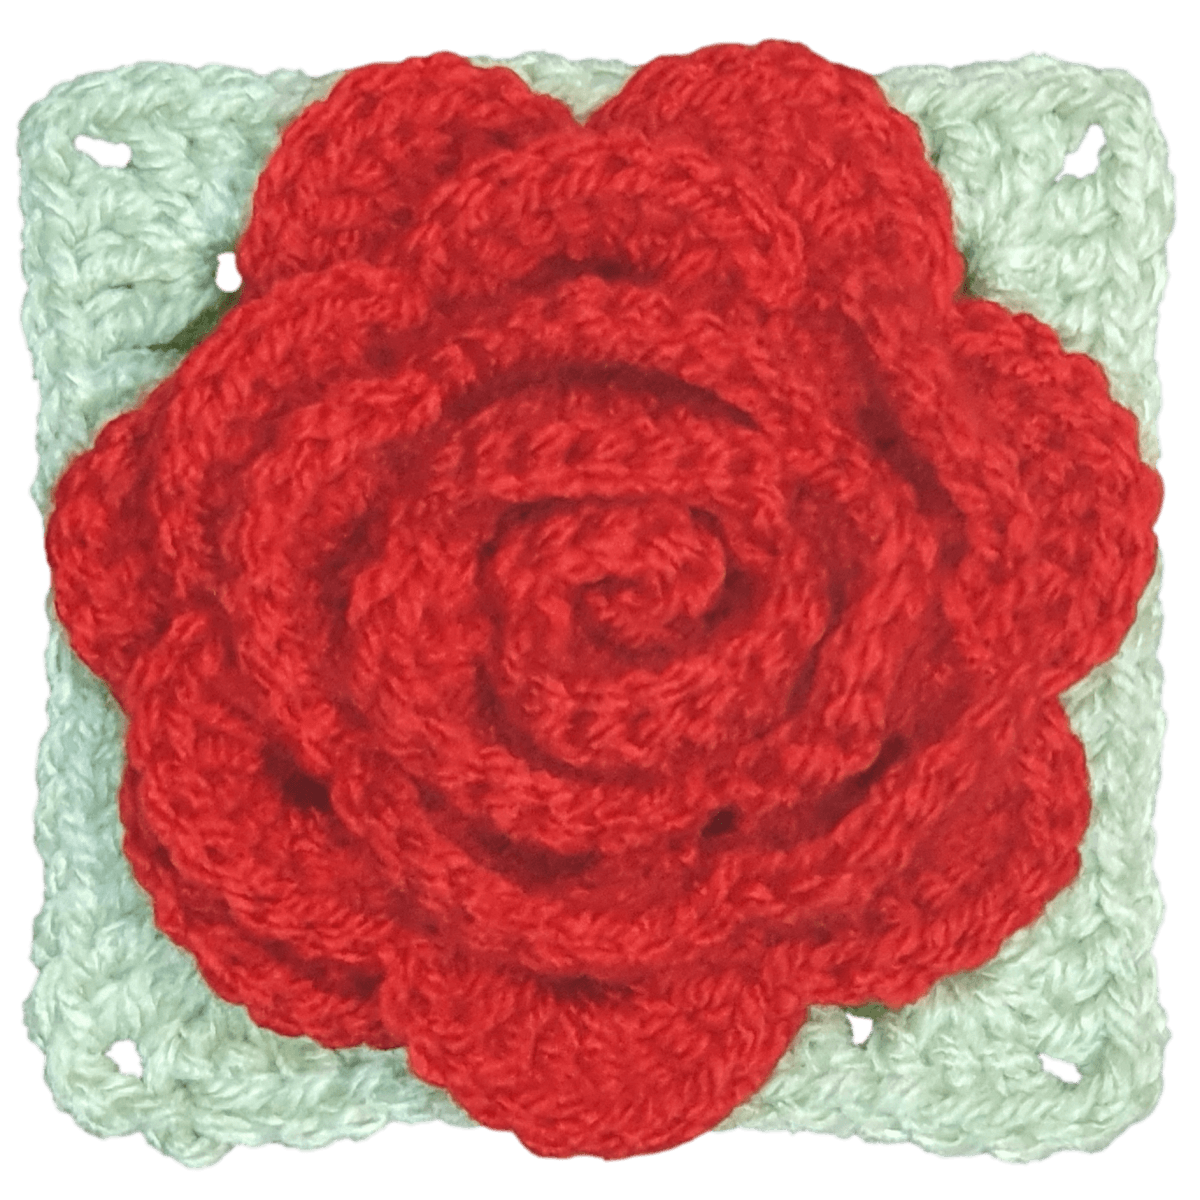 Unlock the Secret to Crocheting the Perfect 3D Rose Granny Square! - The Secret Yarnery